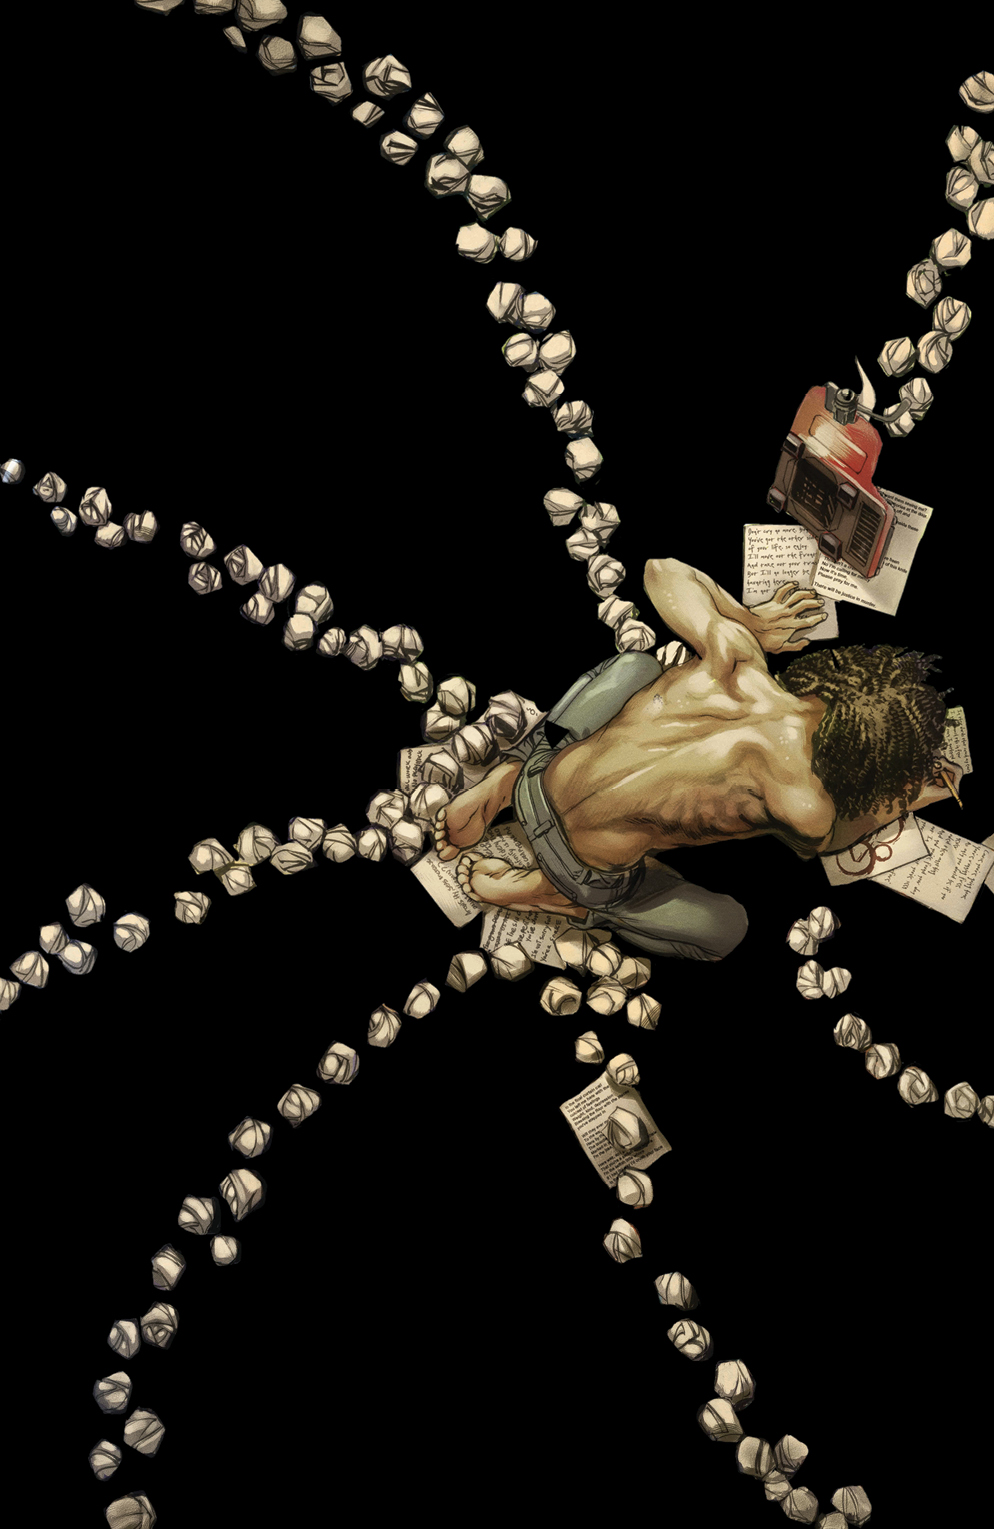 The variant cover for the Coheed and Cambria comic shows the Writer, struggling to finish his story as he sits on the floor, surrounded by papers he's written on as well as balled-up pieces of paper. The balls of paper are arranged around the Writer in a tentacle-like pattern.